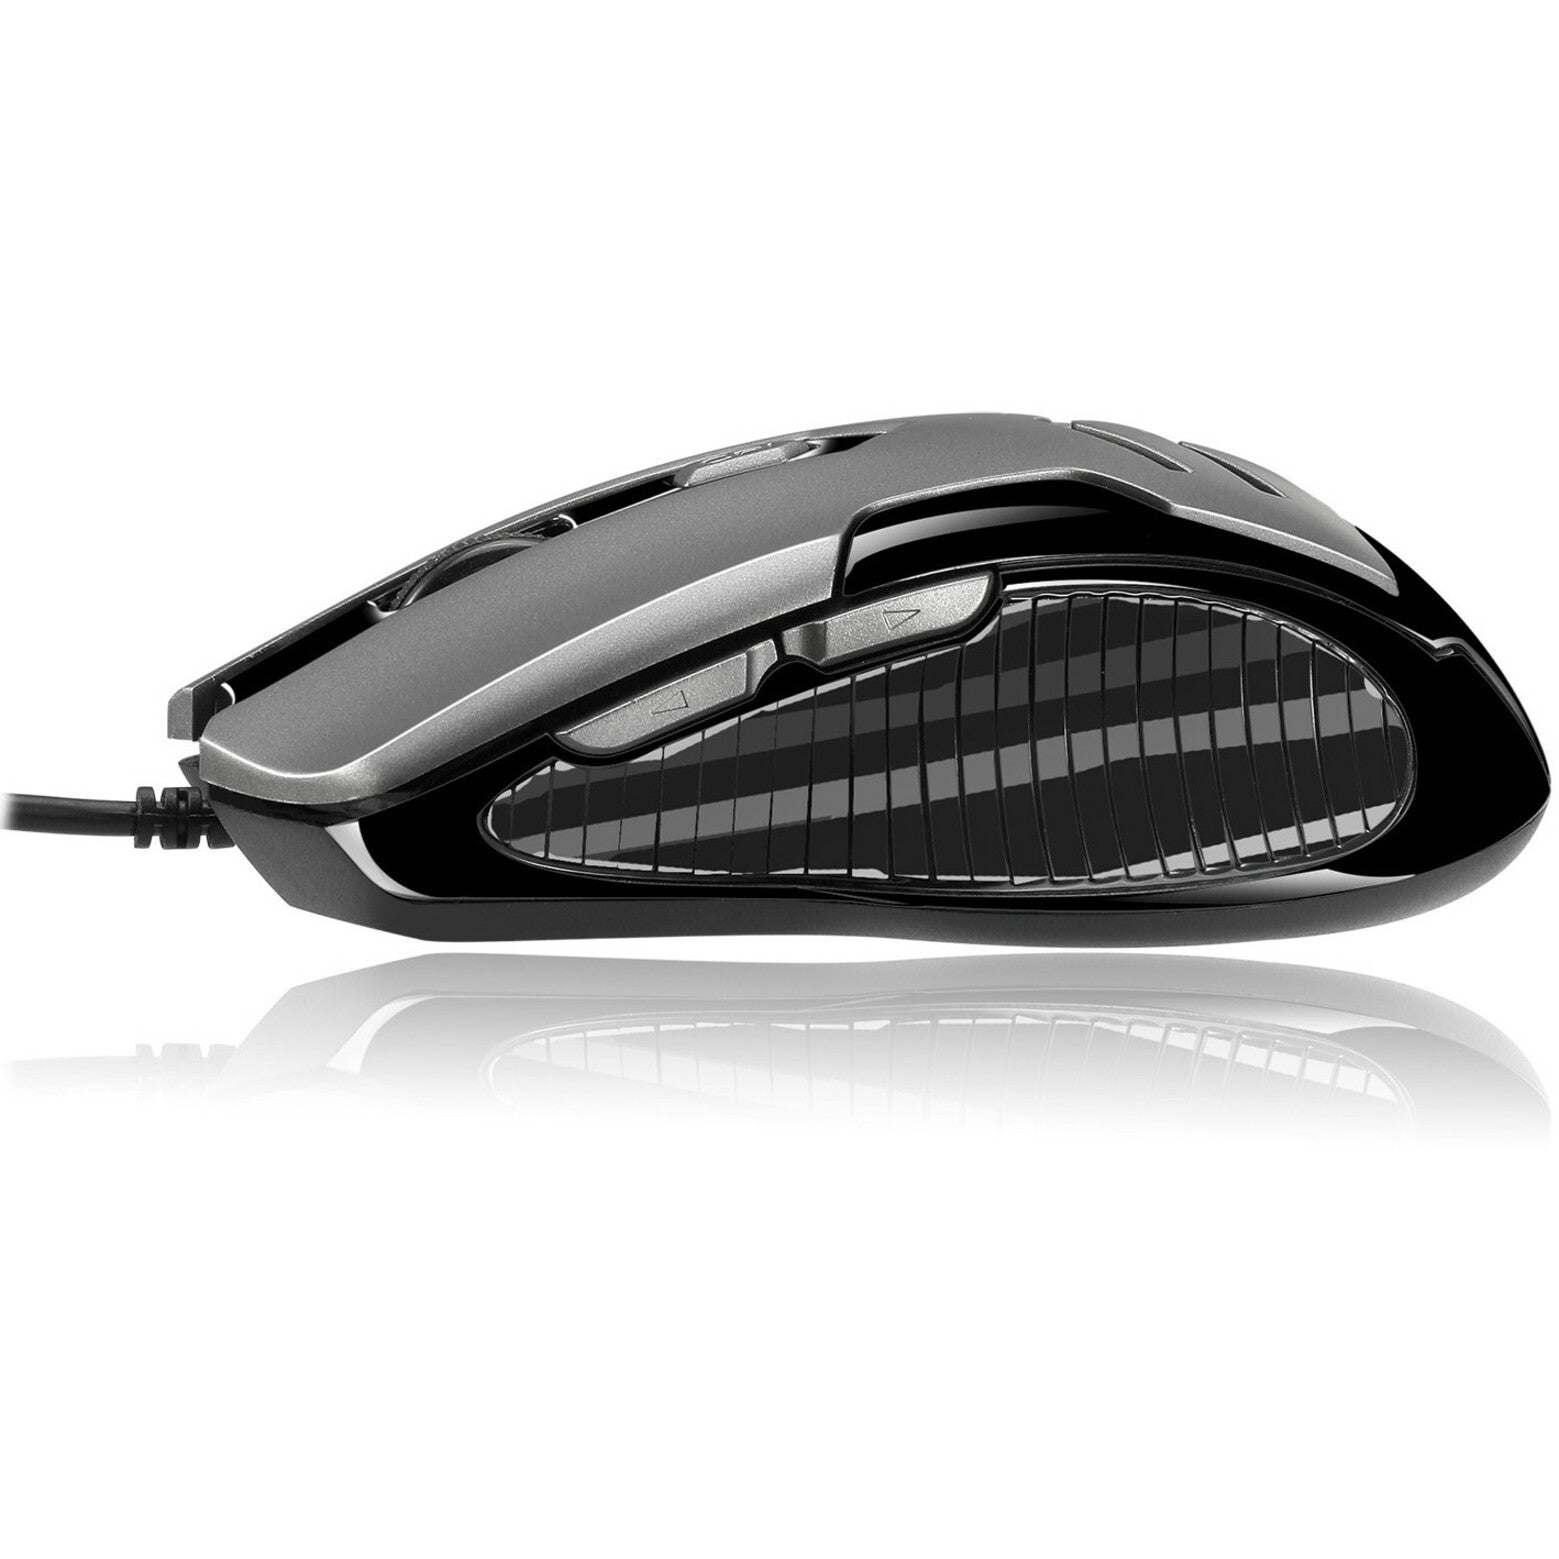 Adesso IMOUSE X1 Multi-Color 6-Button Gaming Mouse, Ergonomic Fit, 3200 DPI, USB Wired